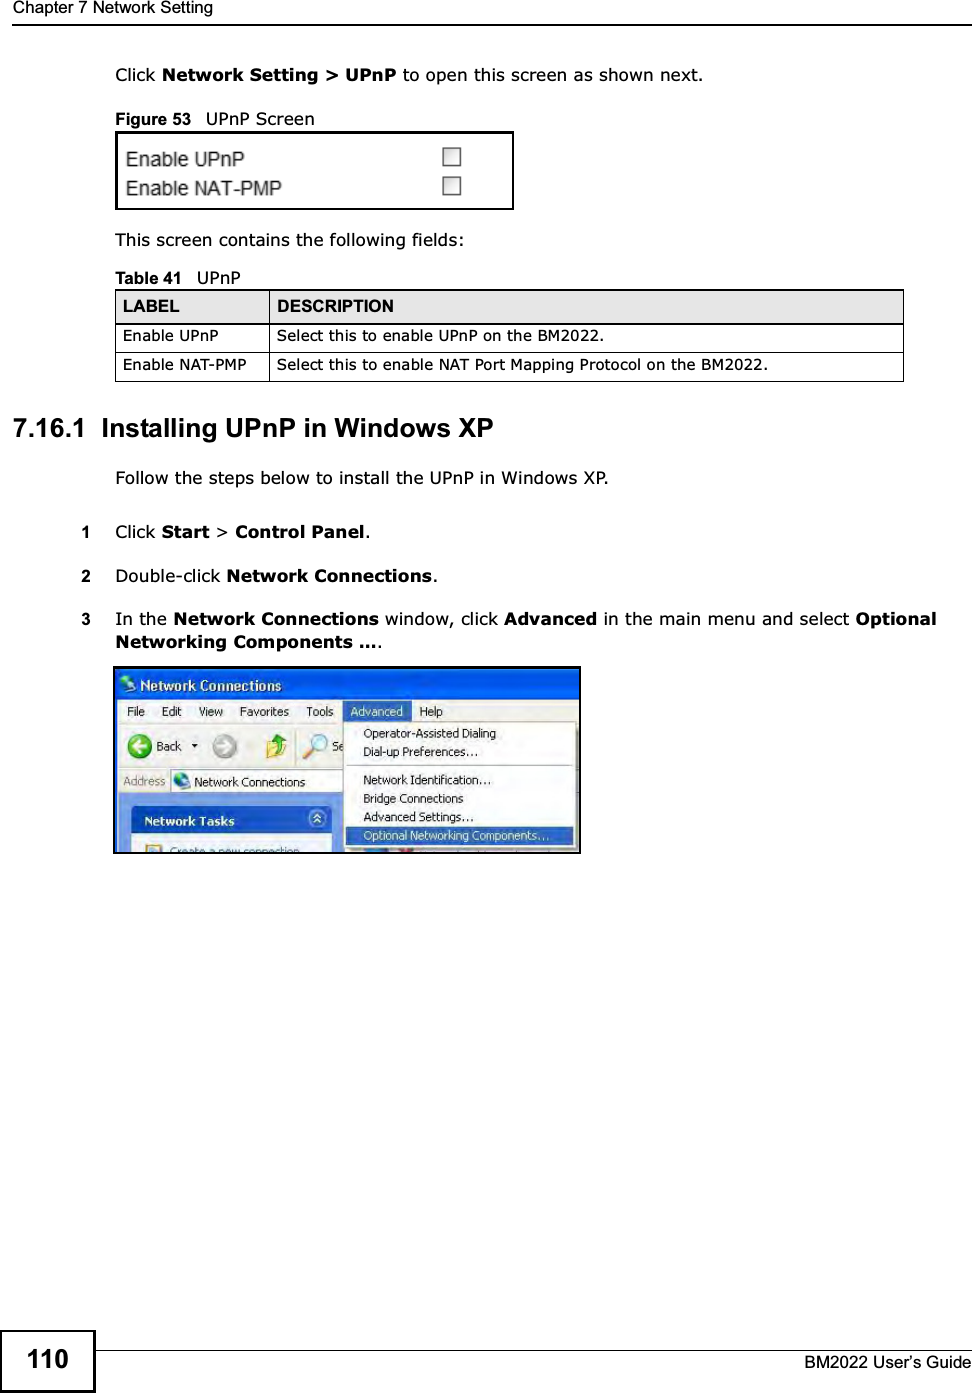 Chapter 7 Network SettingBM2022 Users Guide110Click Network Setting &gt; UPnP to open this screen as shown next.Figure 53   UPnP ScreenThis screen contains the following fields:7.16.1  Installing UPnP in Windows XPFollow the steps below to install the UPnP in Windows XP.1Click Start &gt; Control Panel. 2Double-click Network Connections.3In the Network Connections window, click Advanced in the main menu and select Optional Networking Components . Table 41   UPnPLABEL DESCRIPTIONEnable UPnP Select this to enable UPnP on the BM2022.Enable NAT-PMP Select this to enable NAT Port Mapping Protocol on the BM2022.